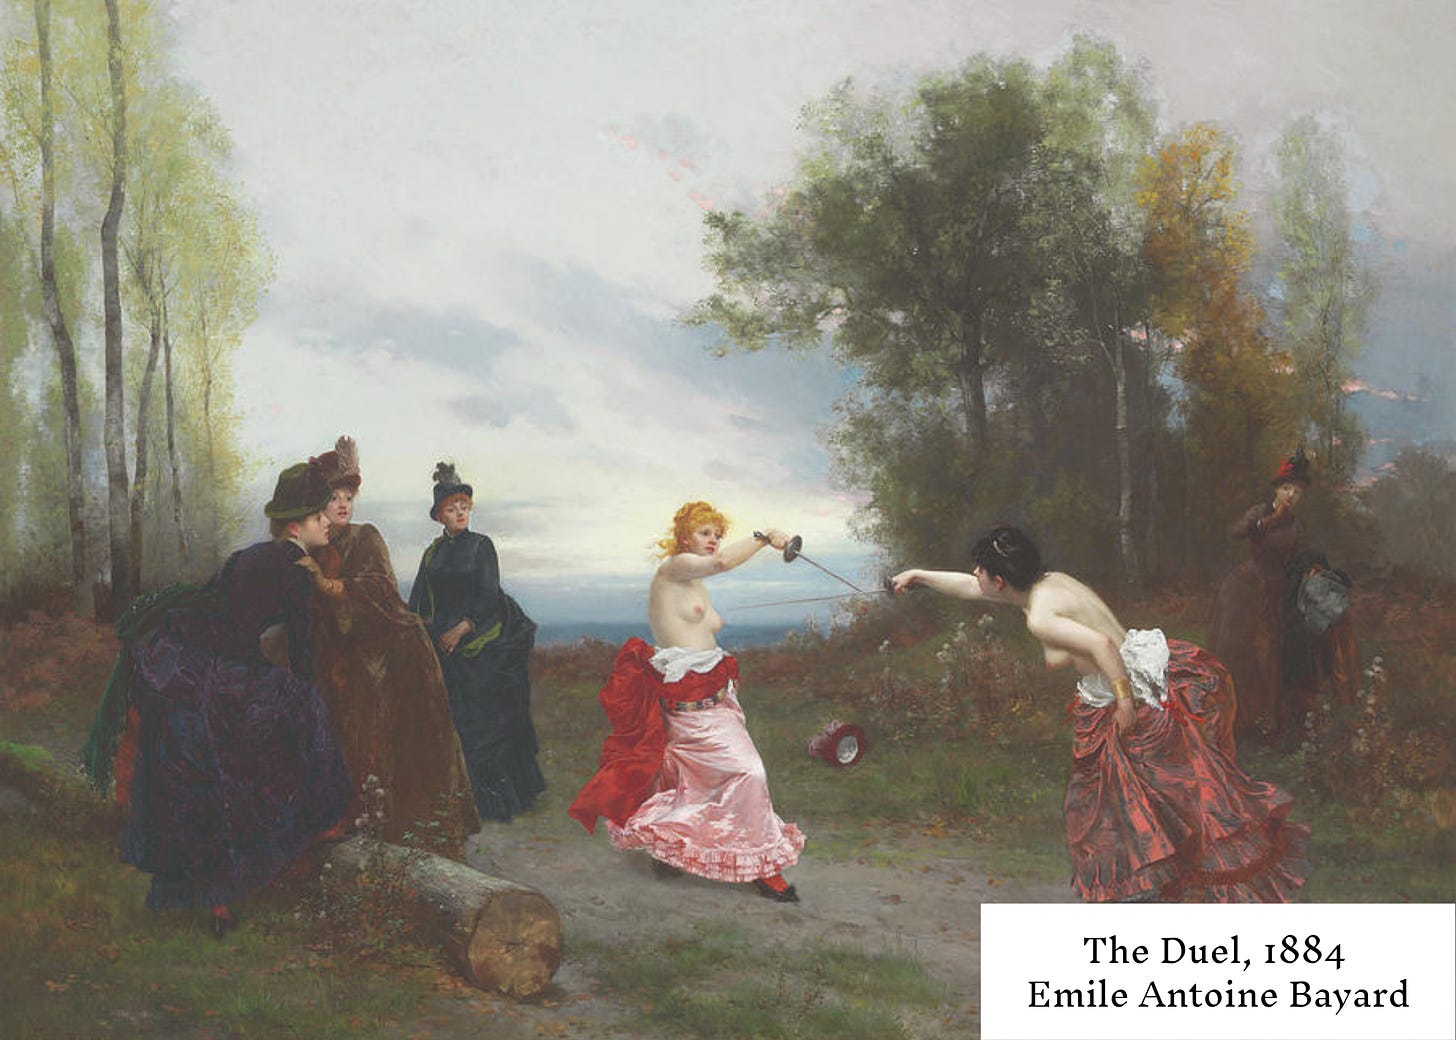 This painting depicts a duel between two women, likely from the upper class, engaged in a sword fight with rapiers. The setting is the Bois de Boulogne, a famous Parisian park known for its association with duels. The women are dressed in fashionable clothing, with their upper torsos bare to avoid clothing contamination from potential wounds (!) 